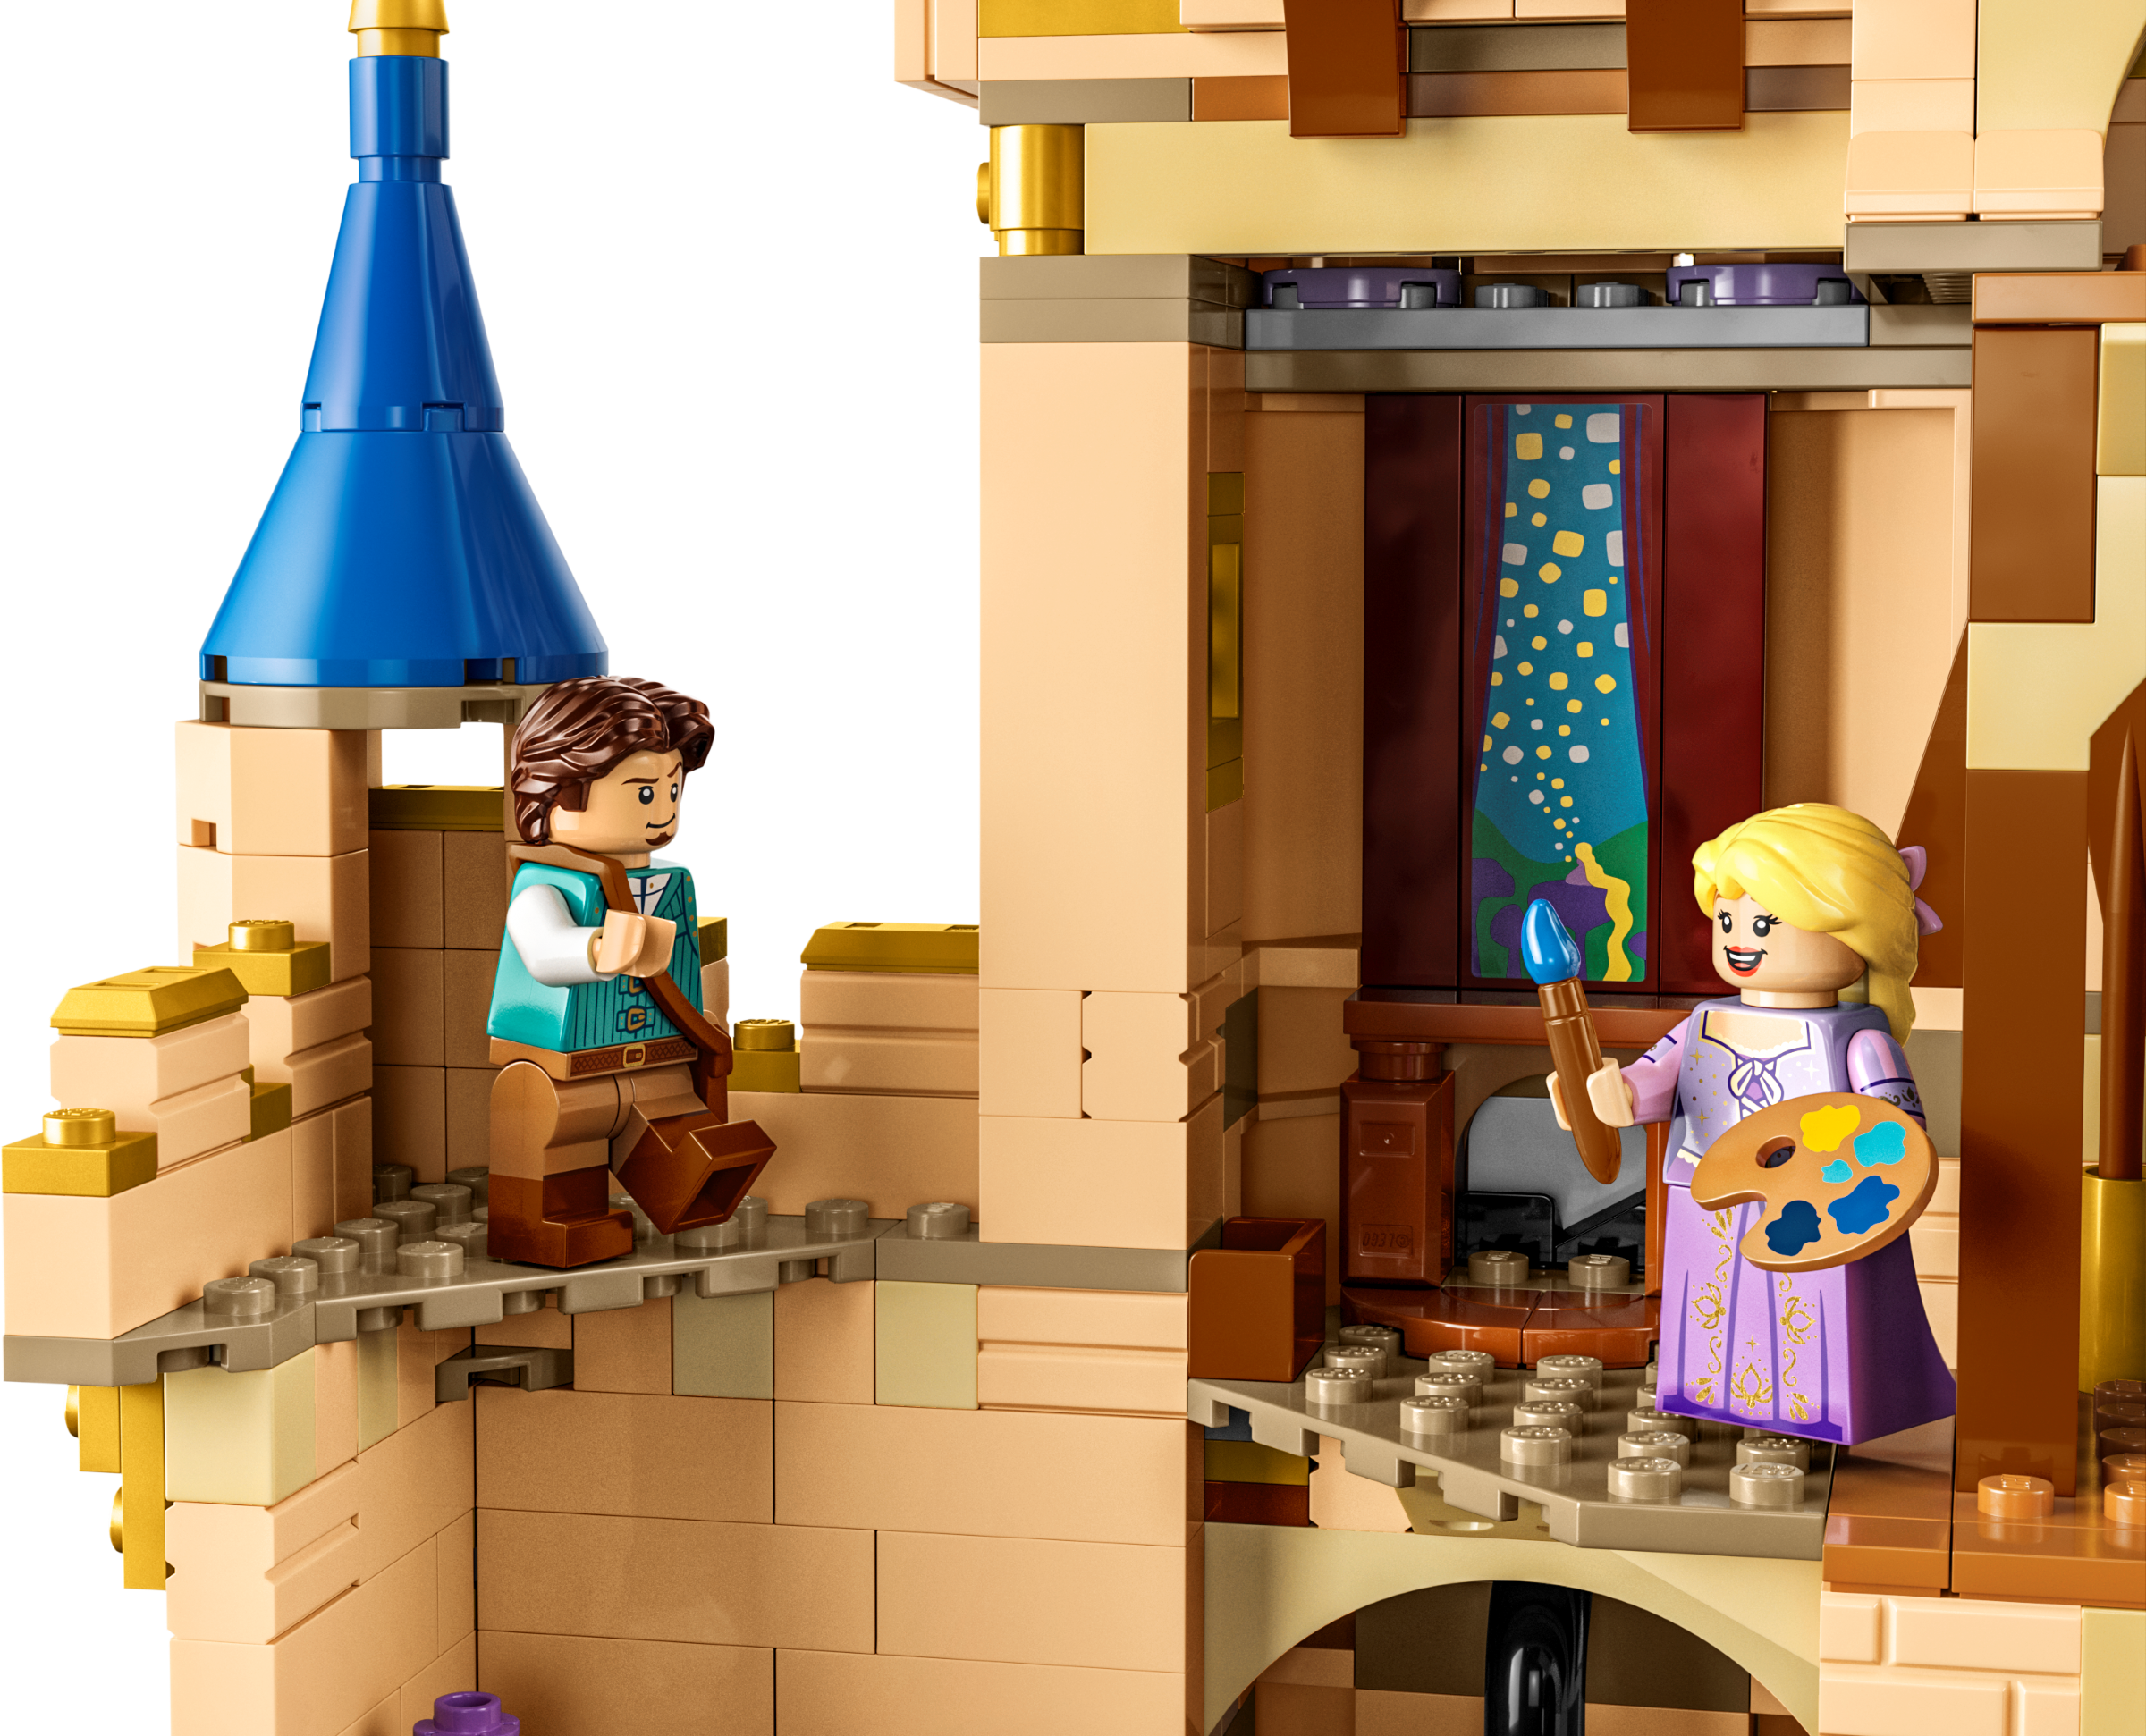 LEGO Disney 43222 The Disney Castle: new and improved? [Review